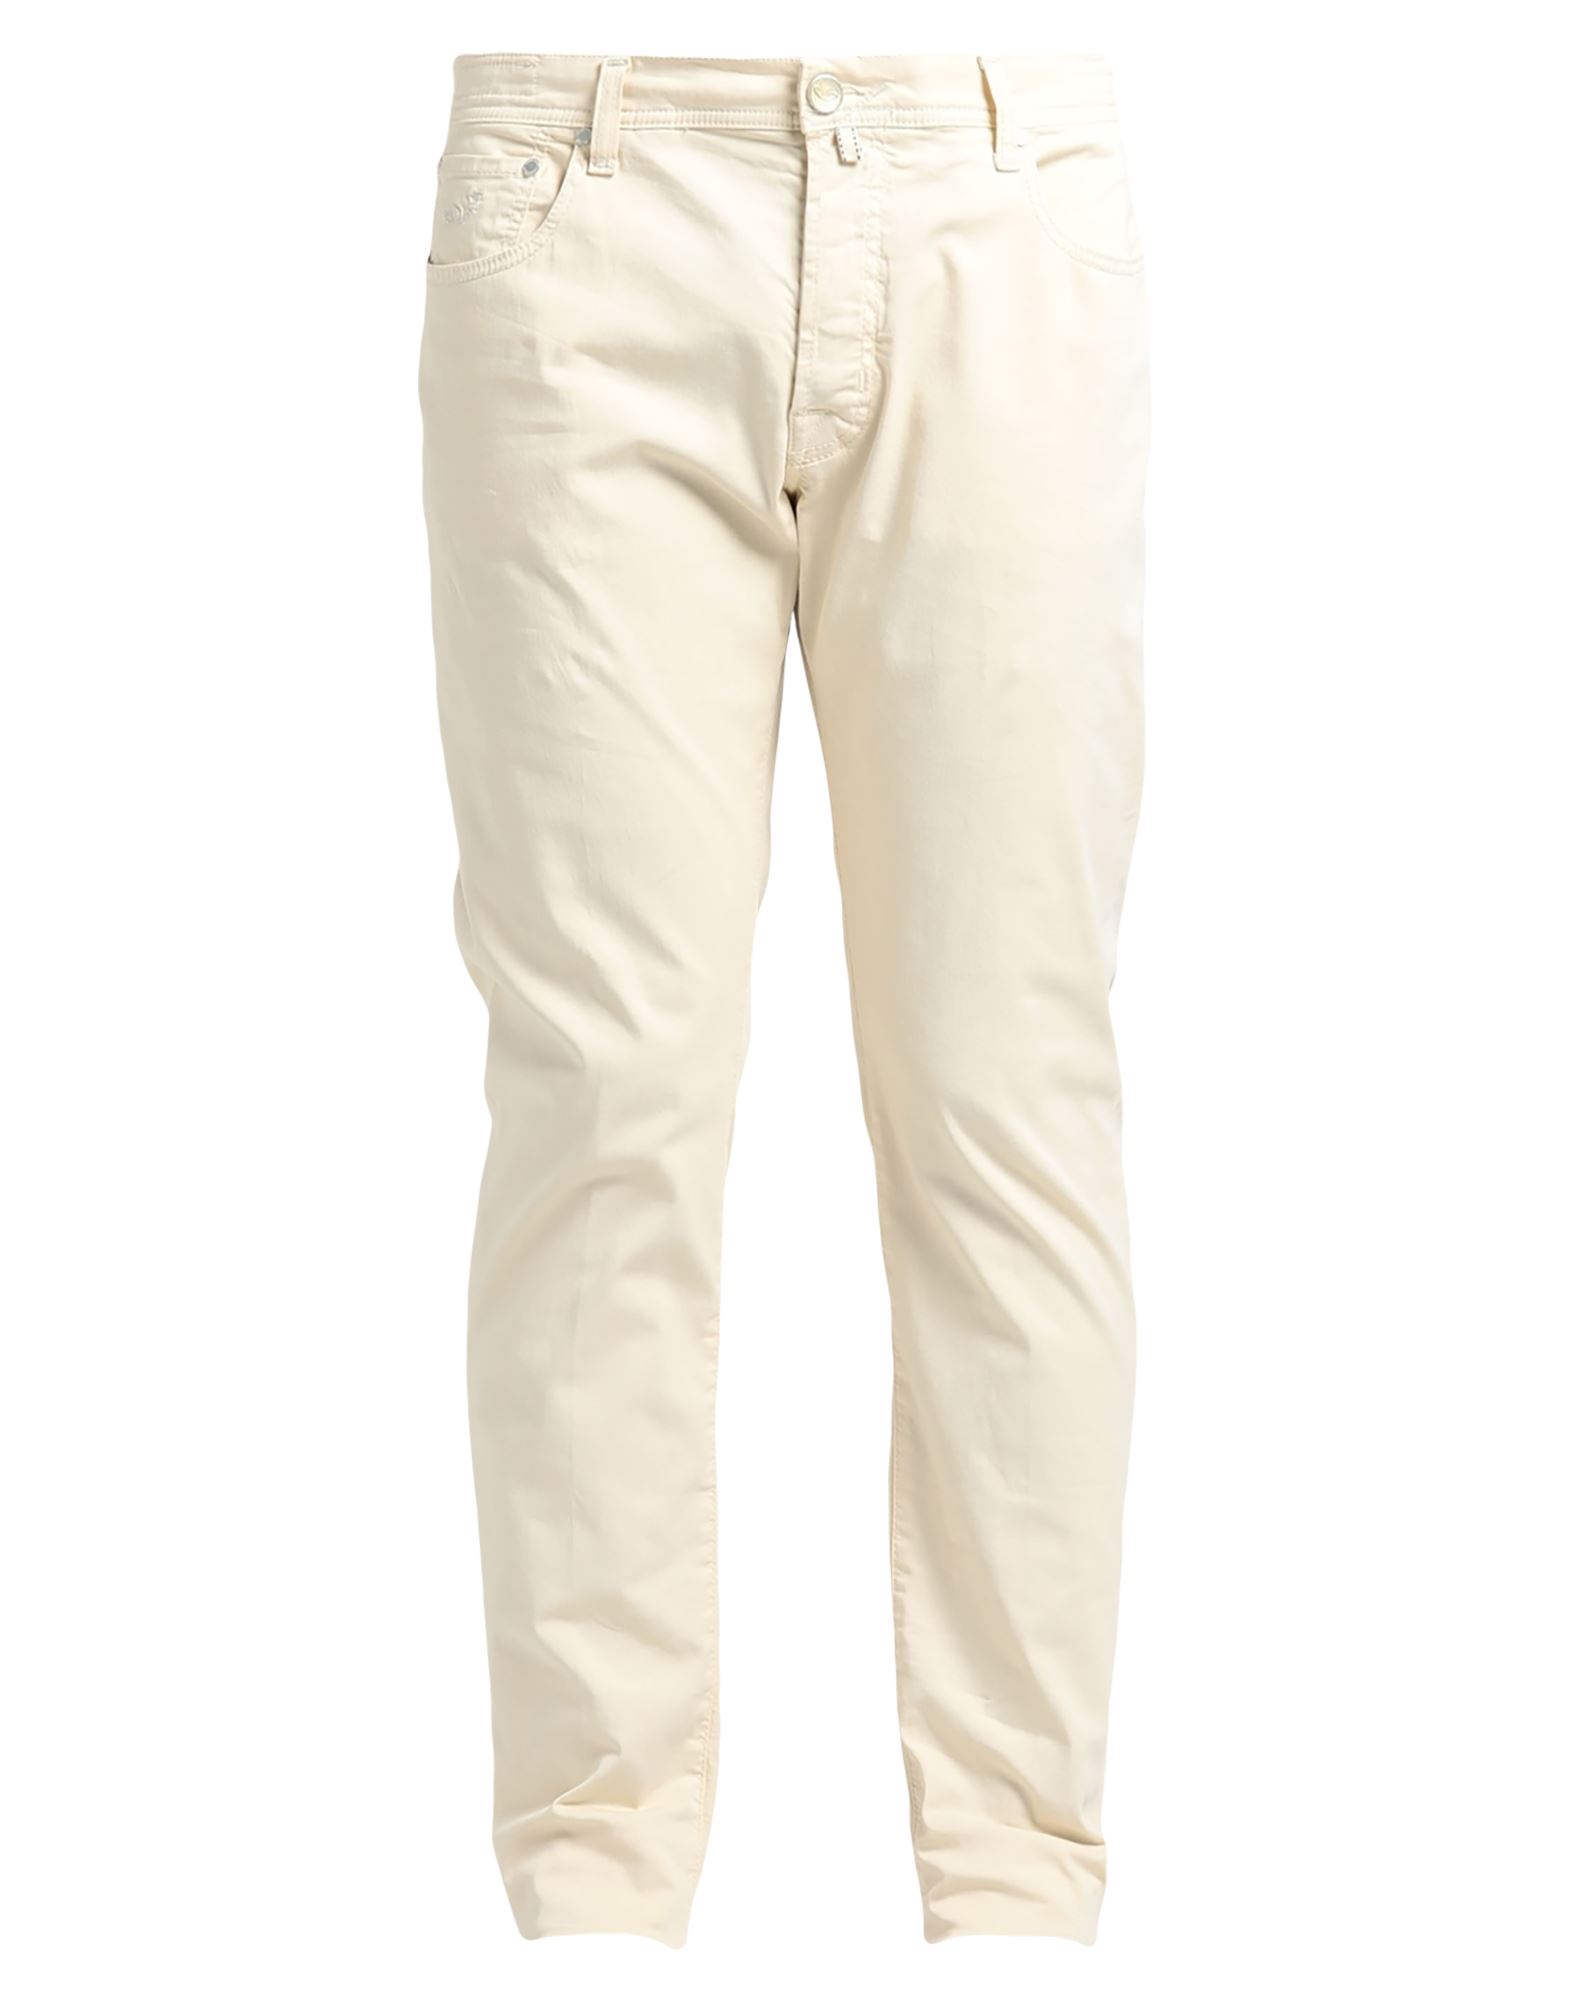 Jacob Cohёn Pants In Ivory